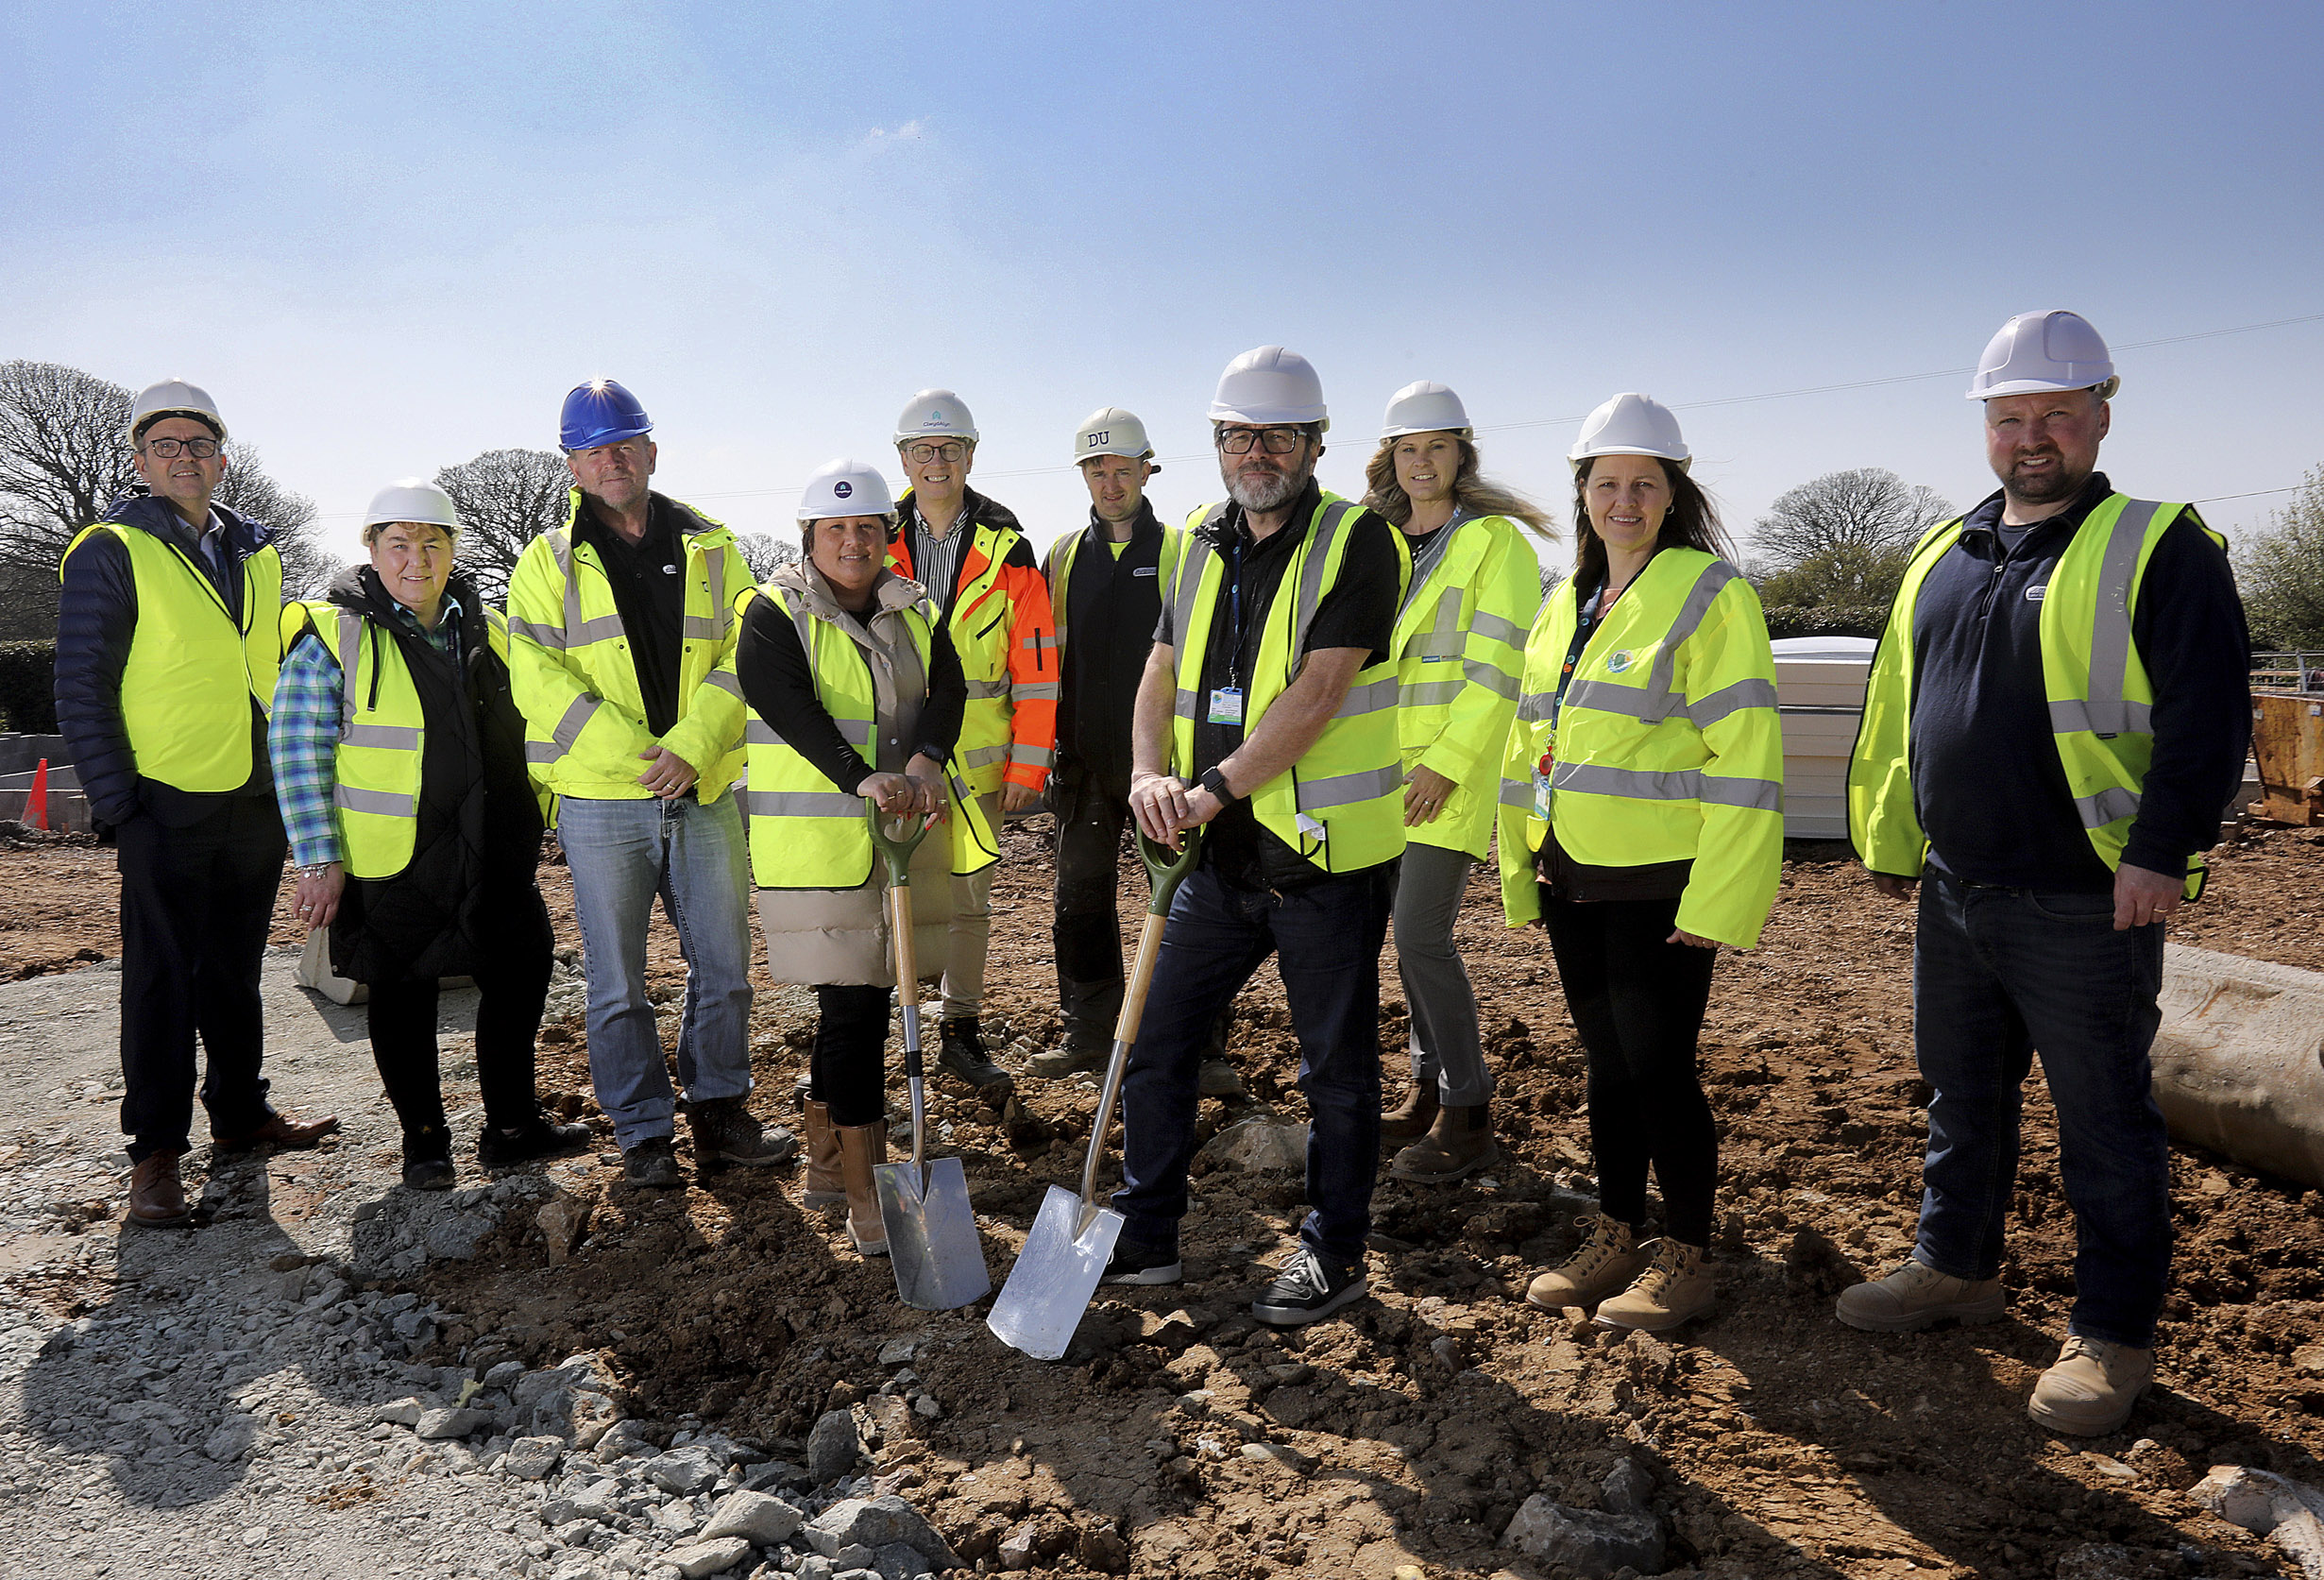 ClwydAlyn ground breaking ceremony, Anglesey, Stad Bryn Glas